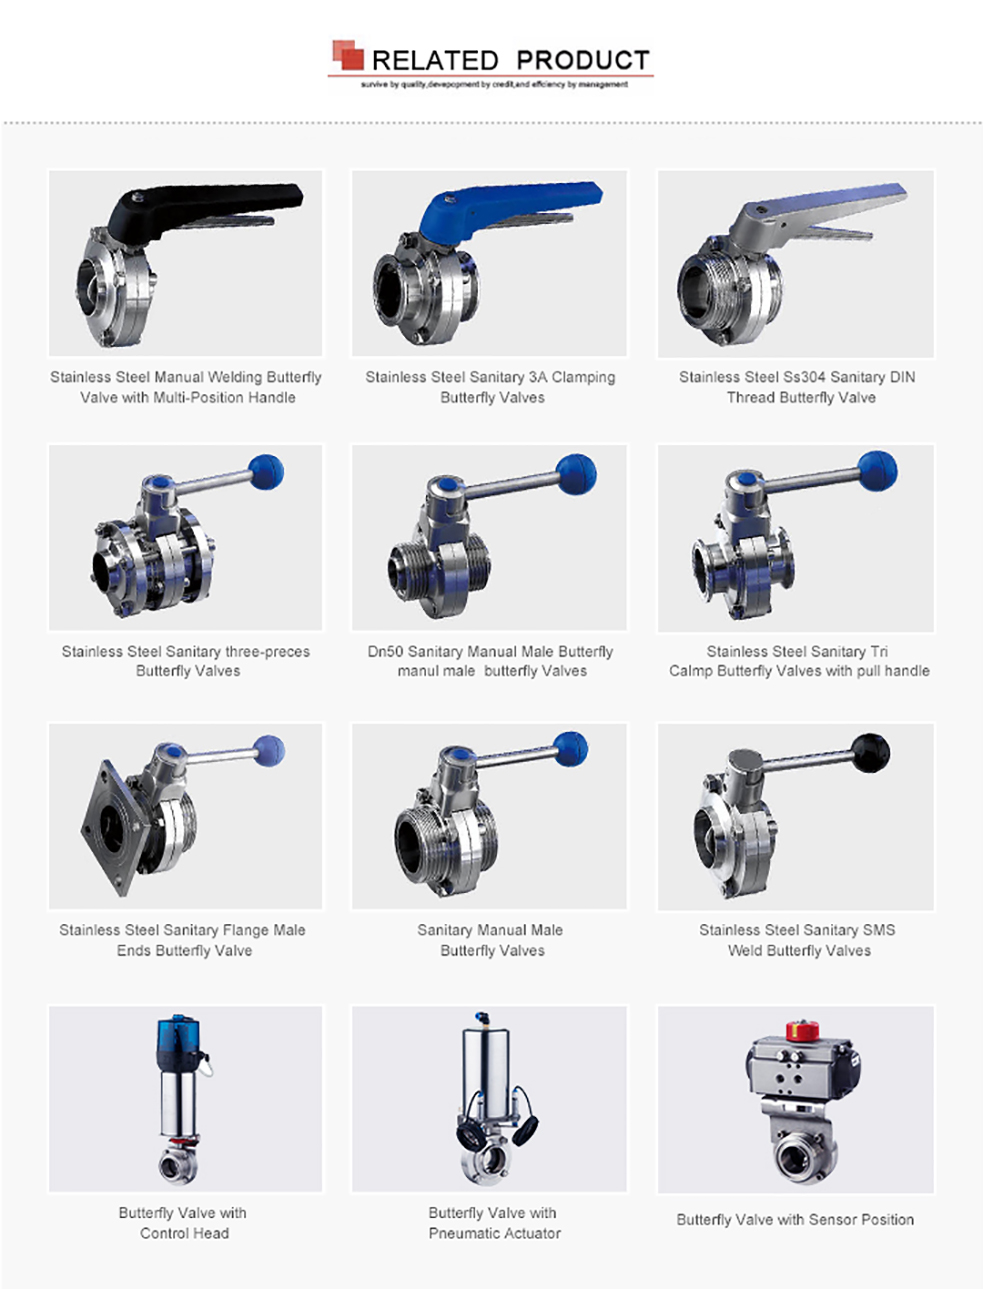 Related Sanitary Hygienic Butterfly Valves